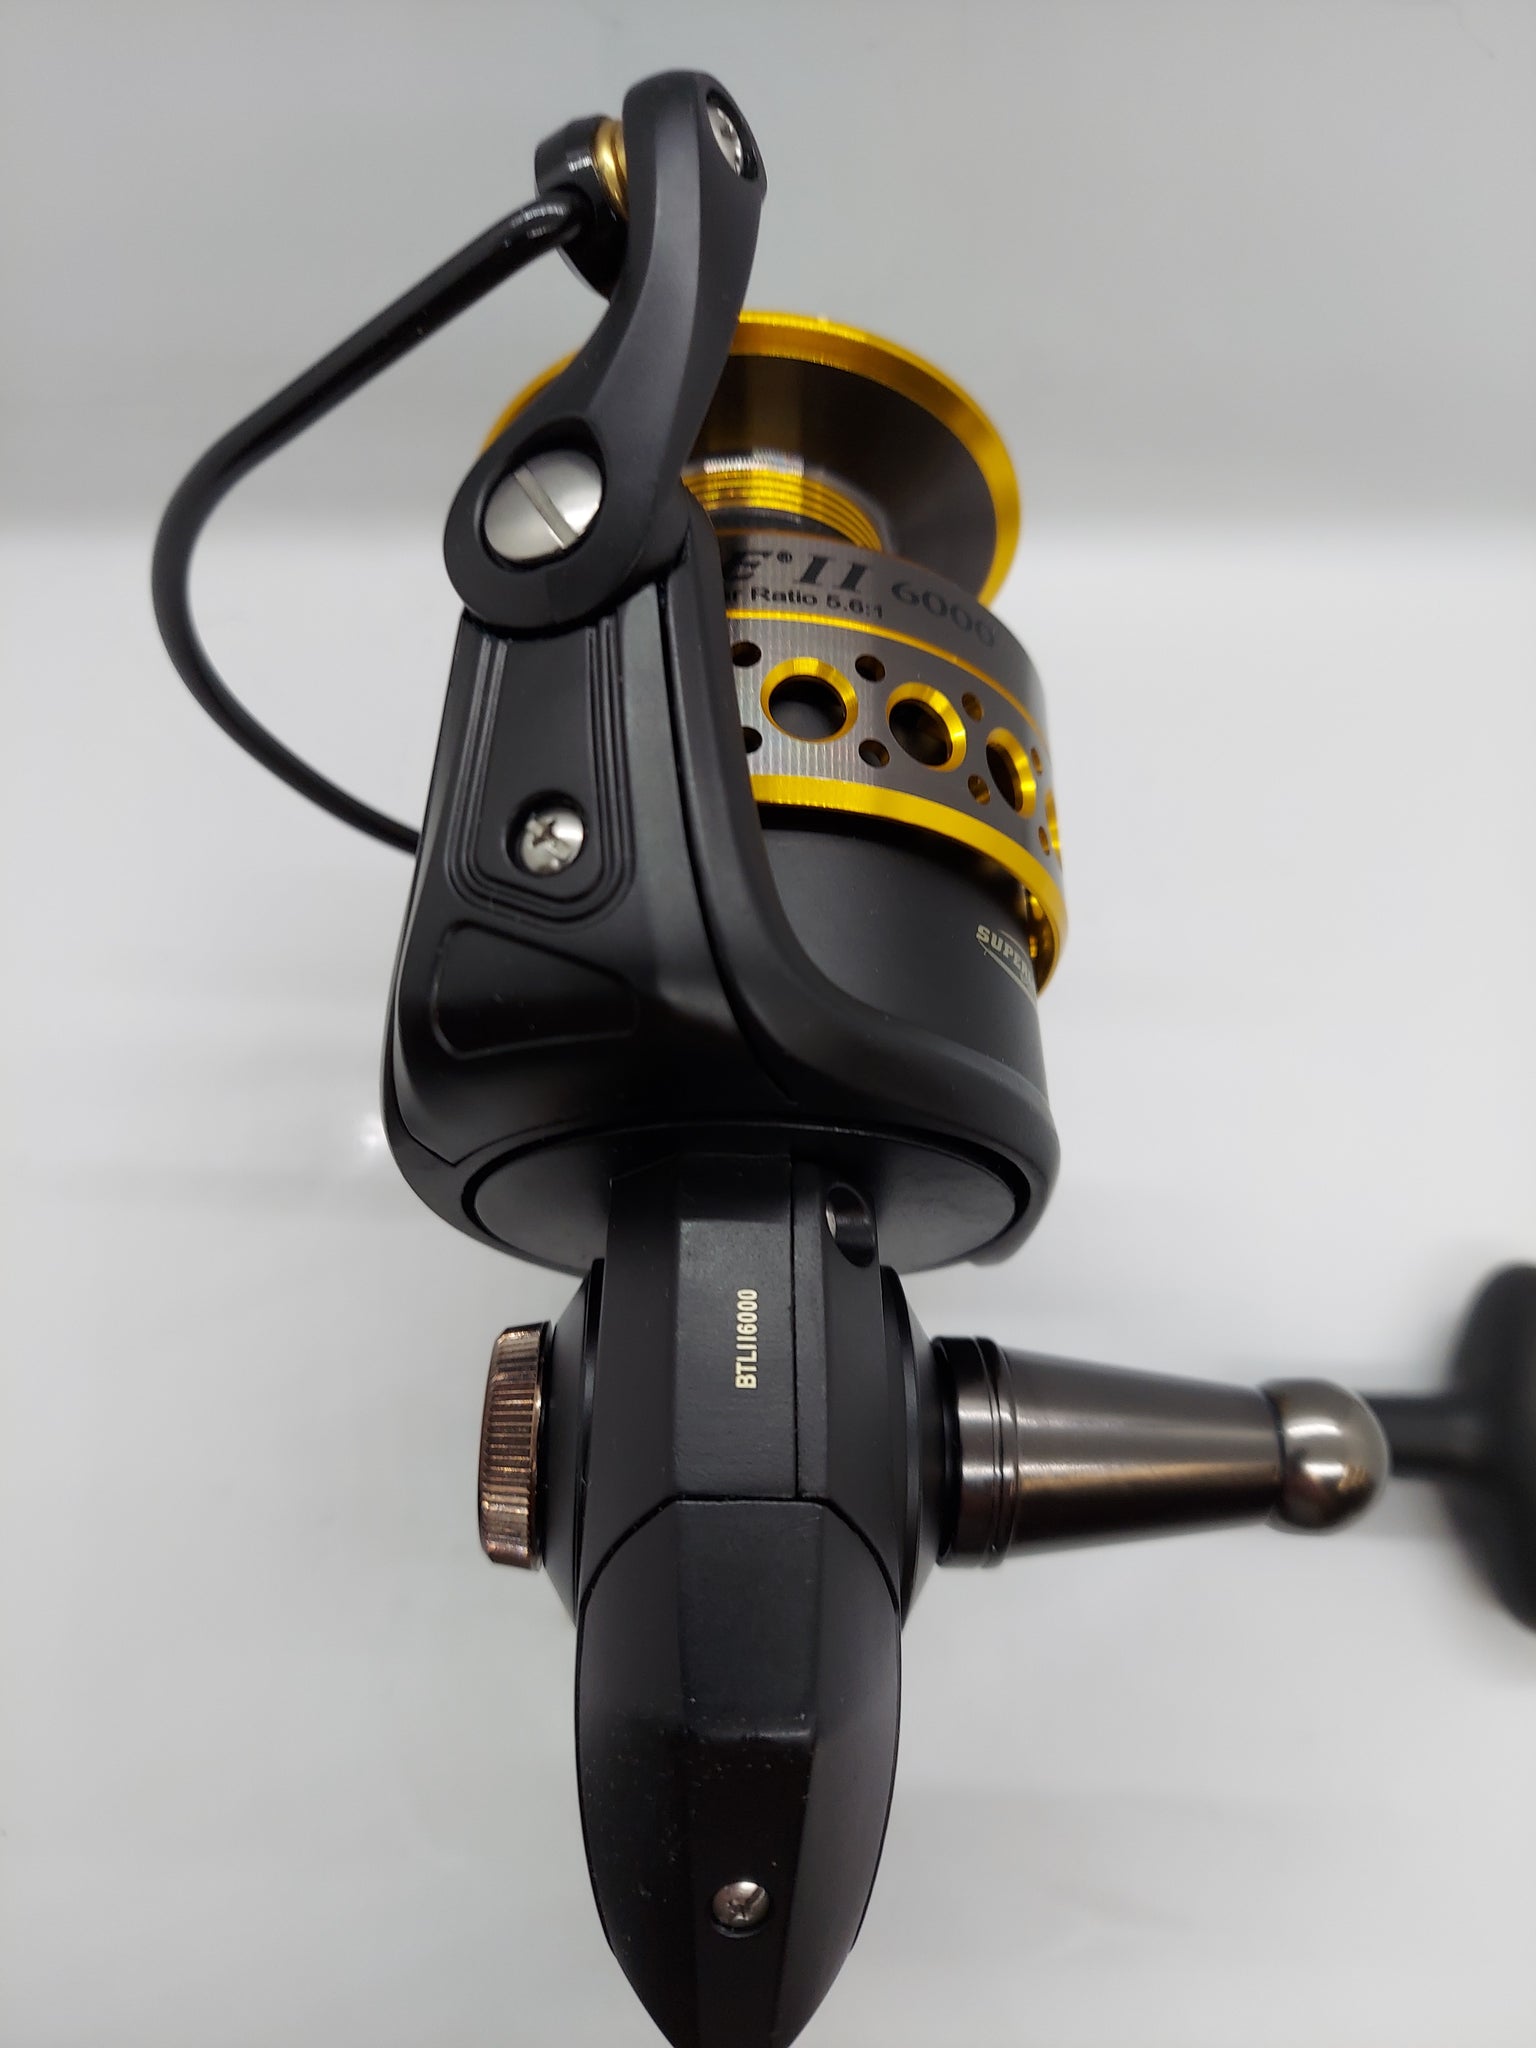 Penn Battle II 6000 Fishing Reel - How to take apart, service and